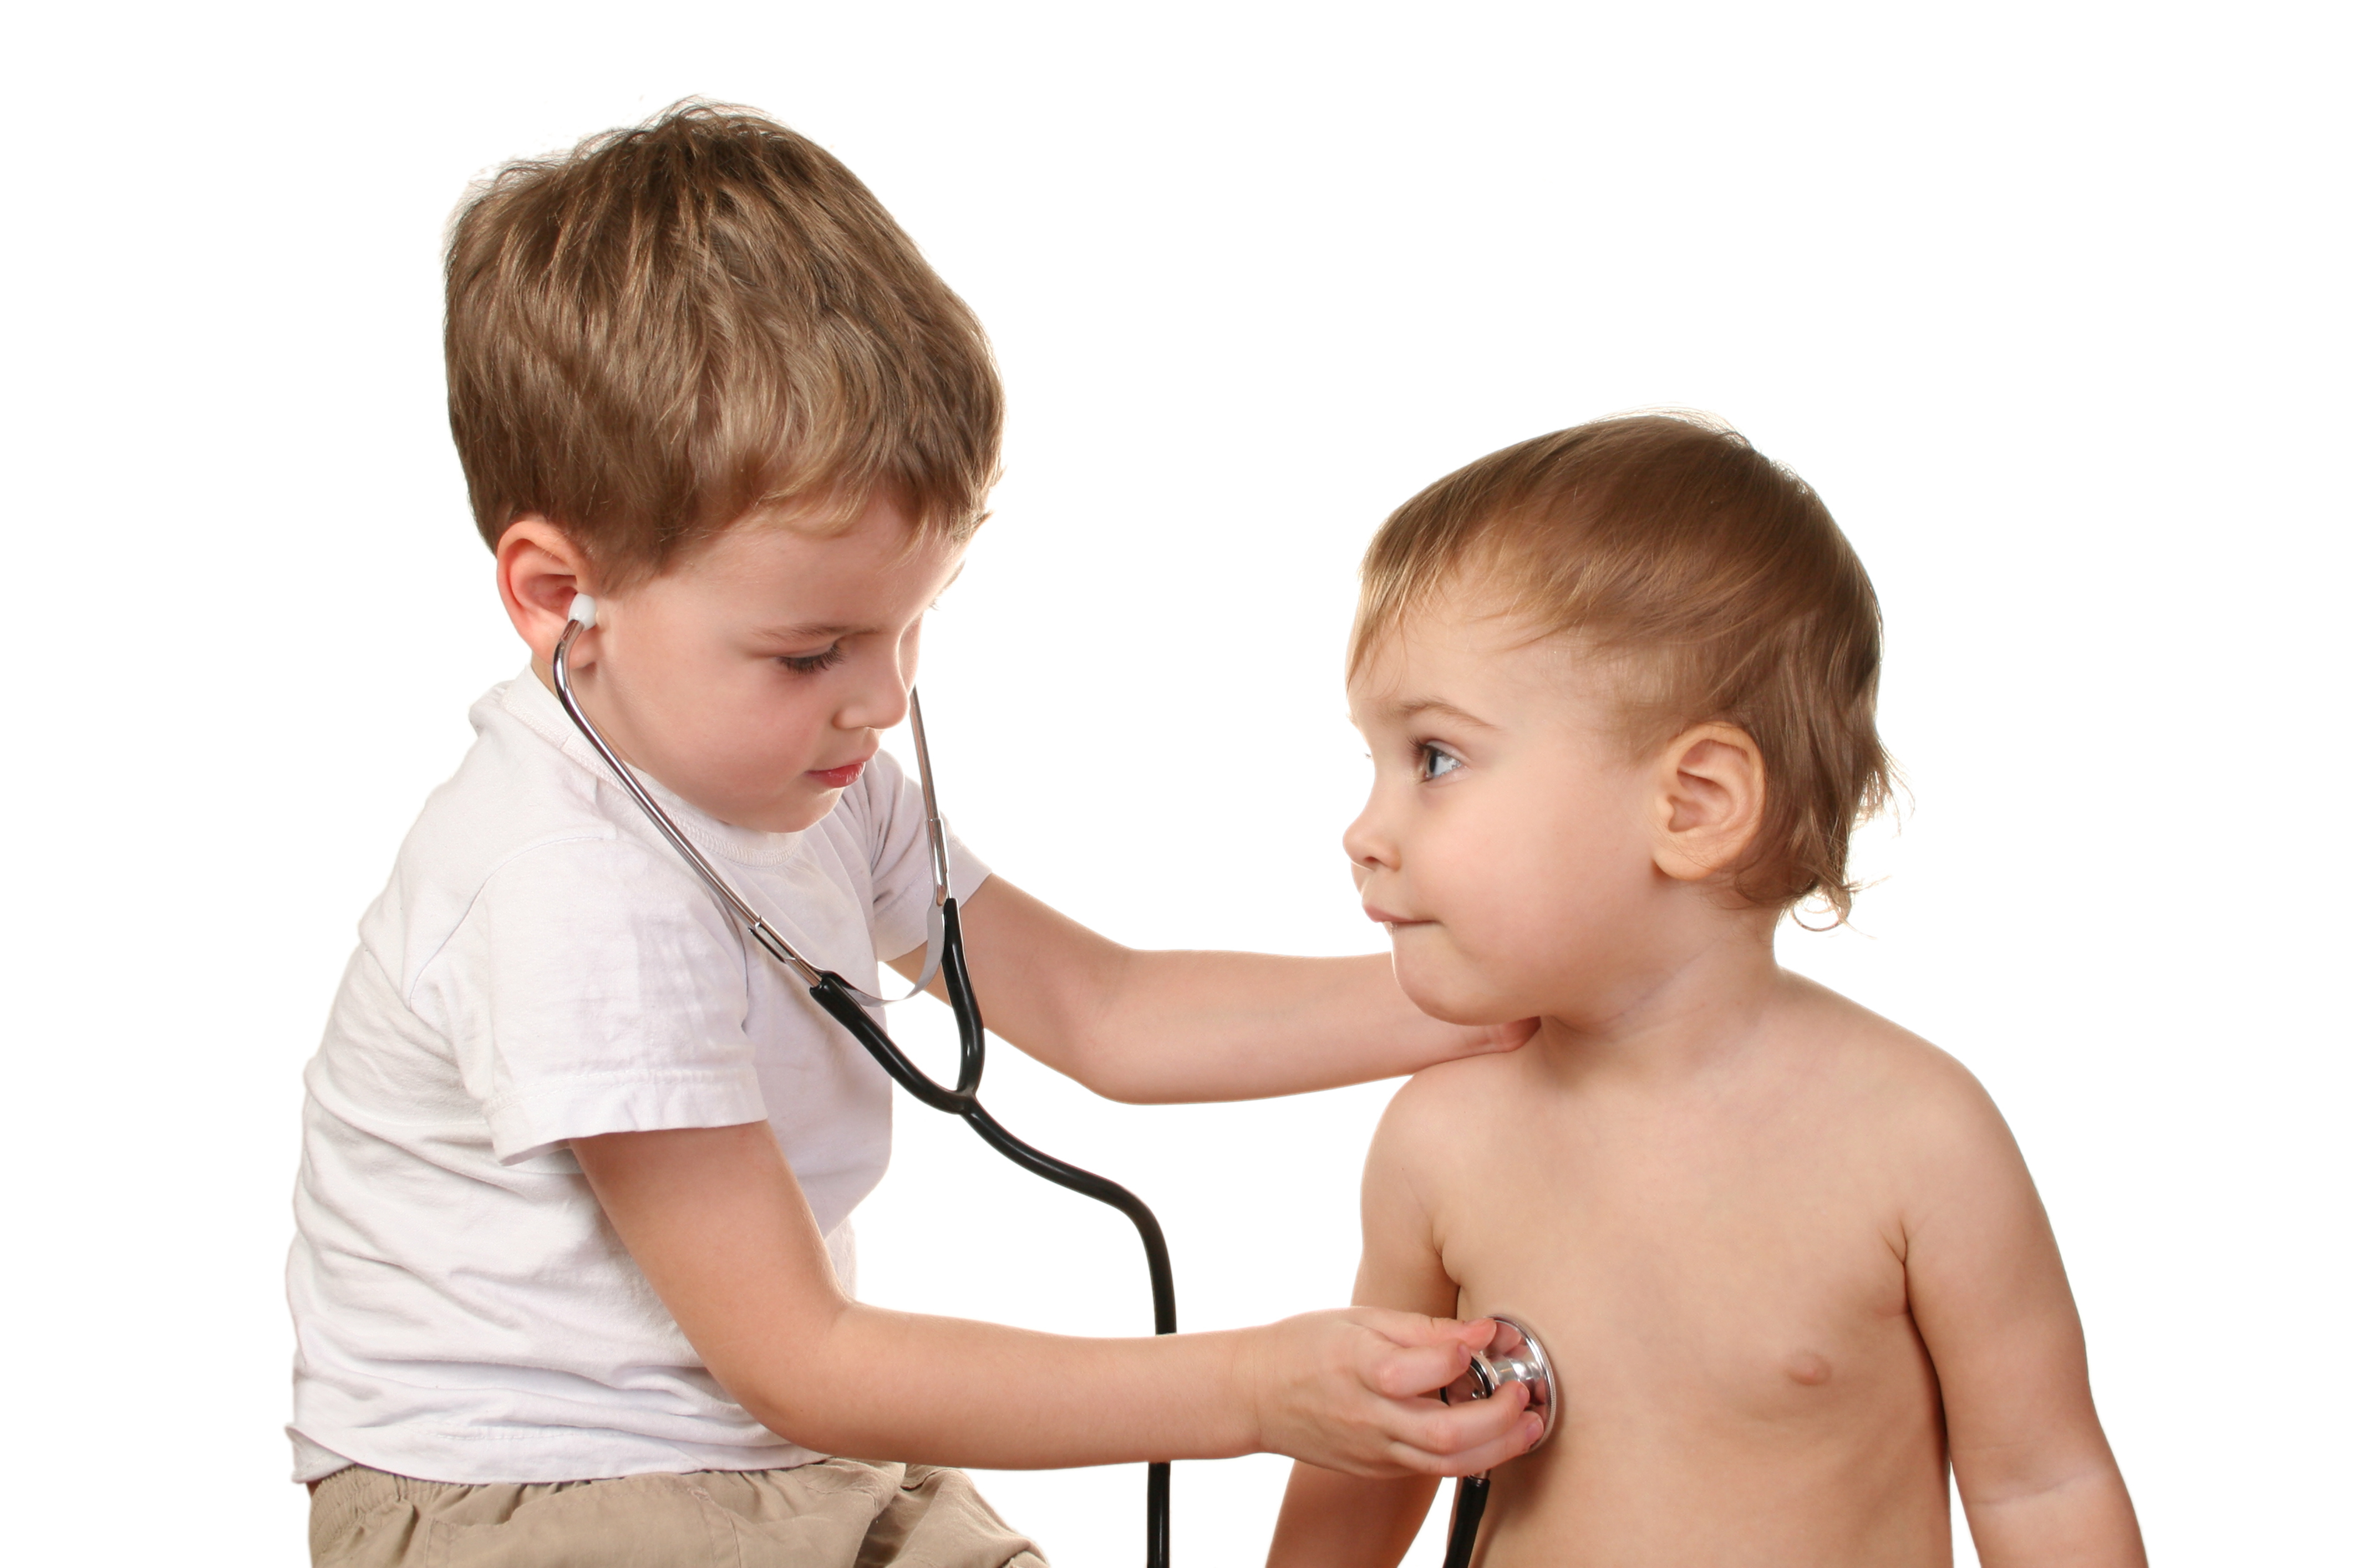 http://www.dreamstime.com/stock-photography-children-play-doctor-image1729572